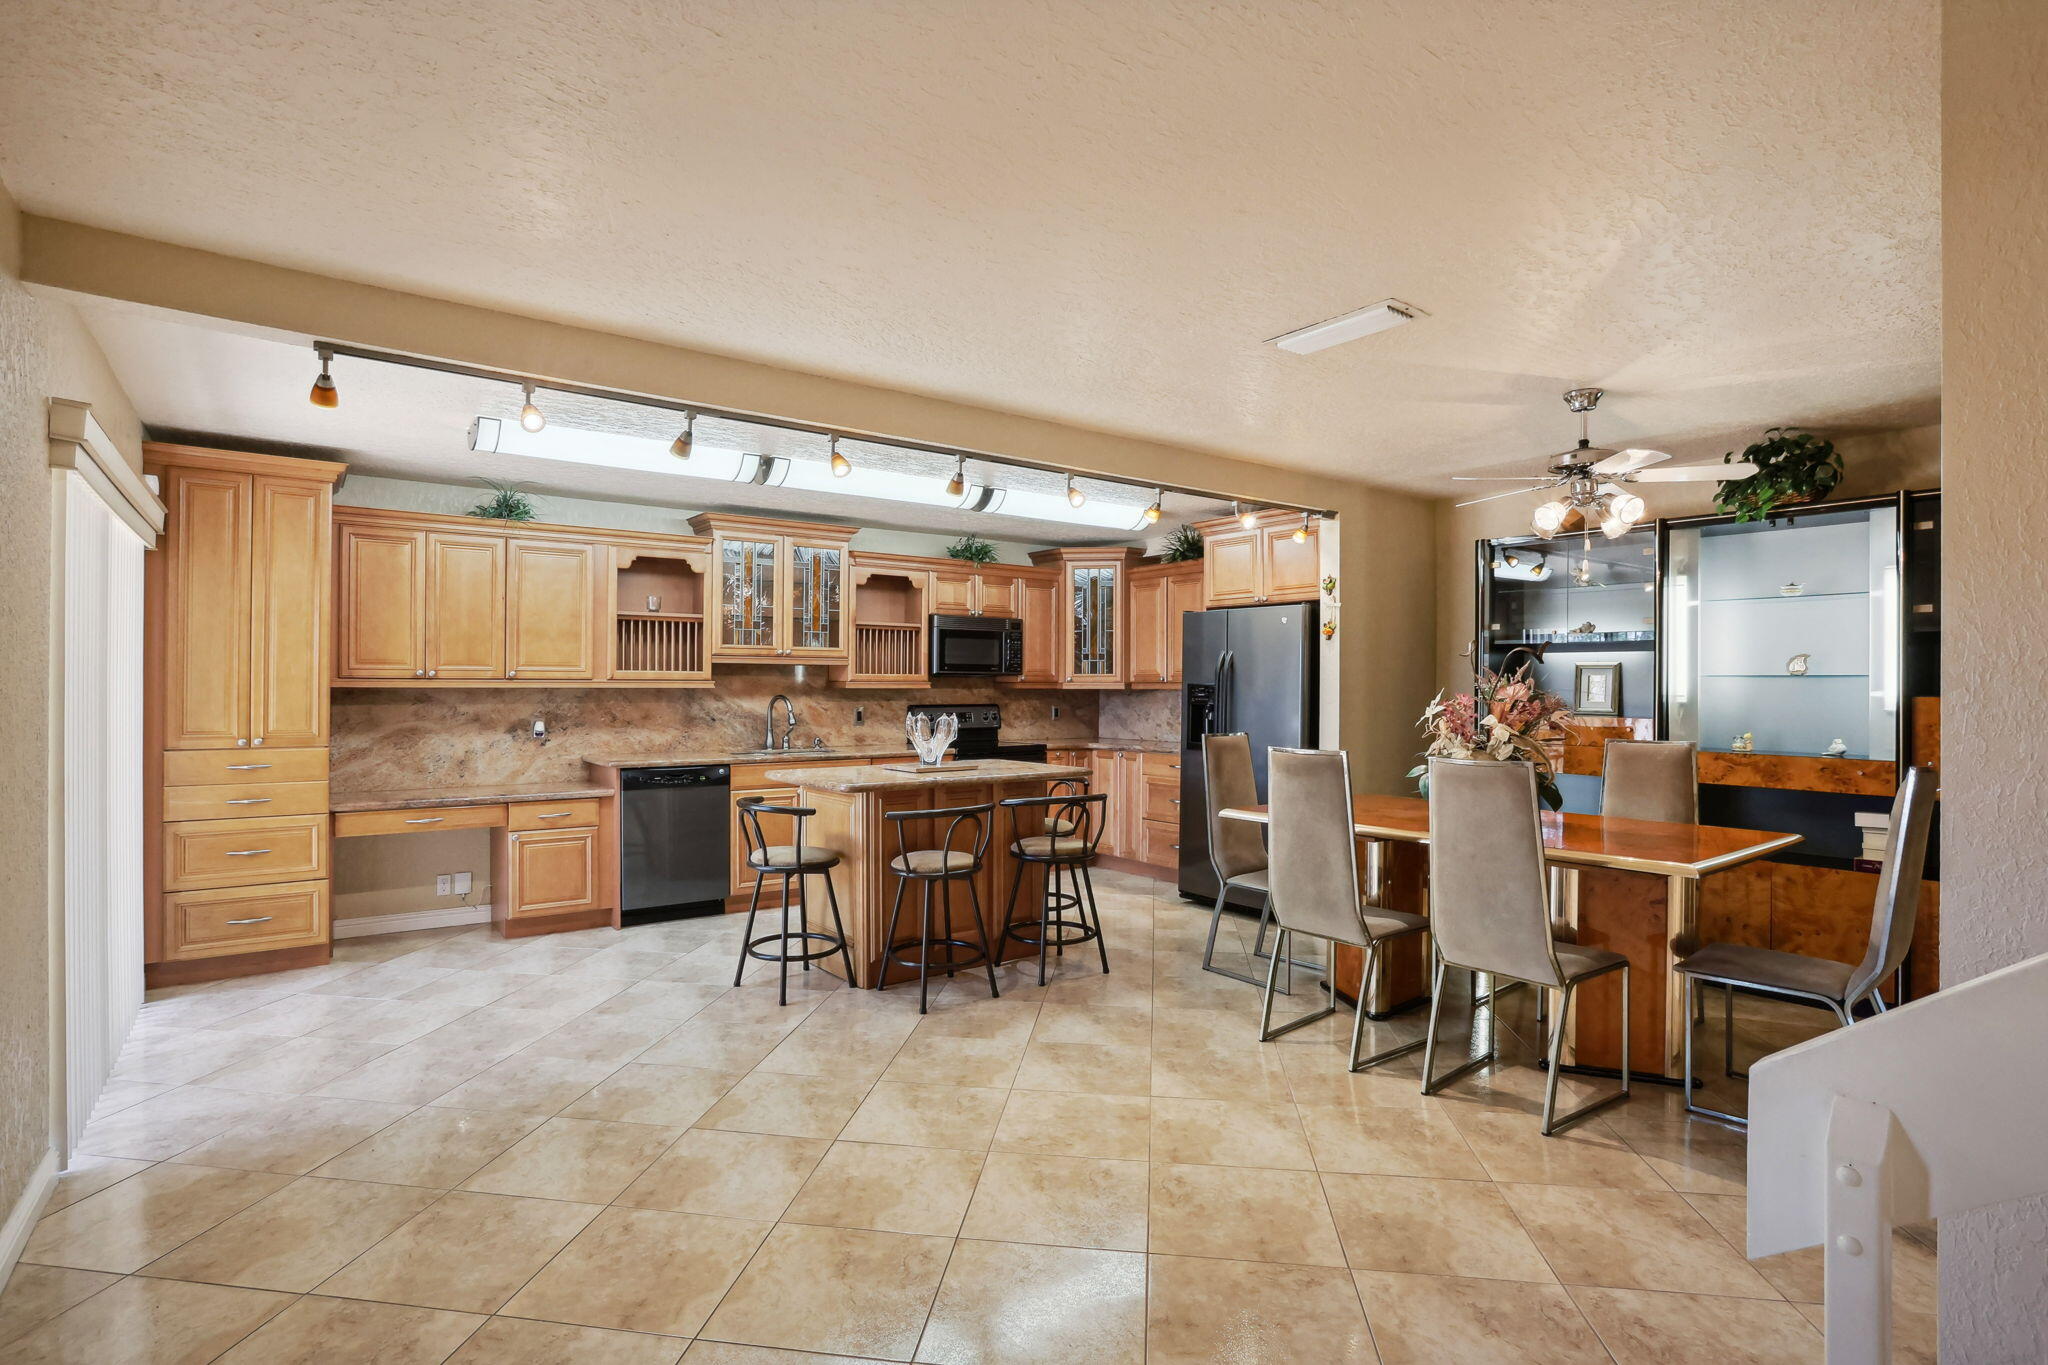 a open kitchen with stainless steel appliances kitchen island granite countertop a refrigerator and cabinets